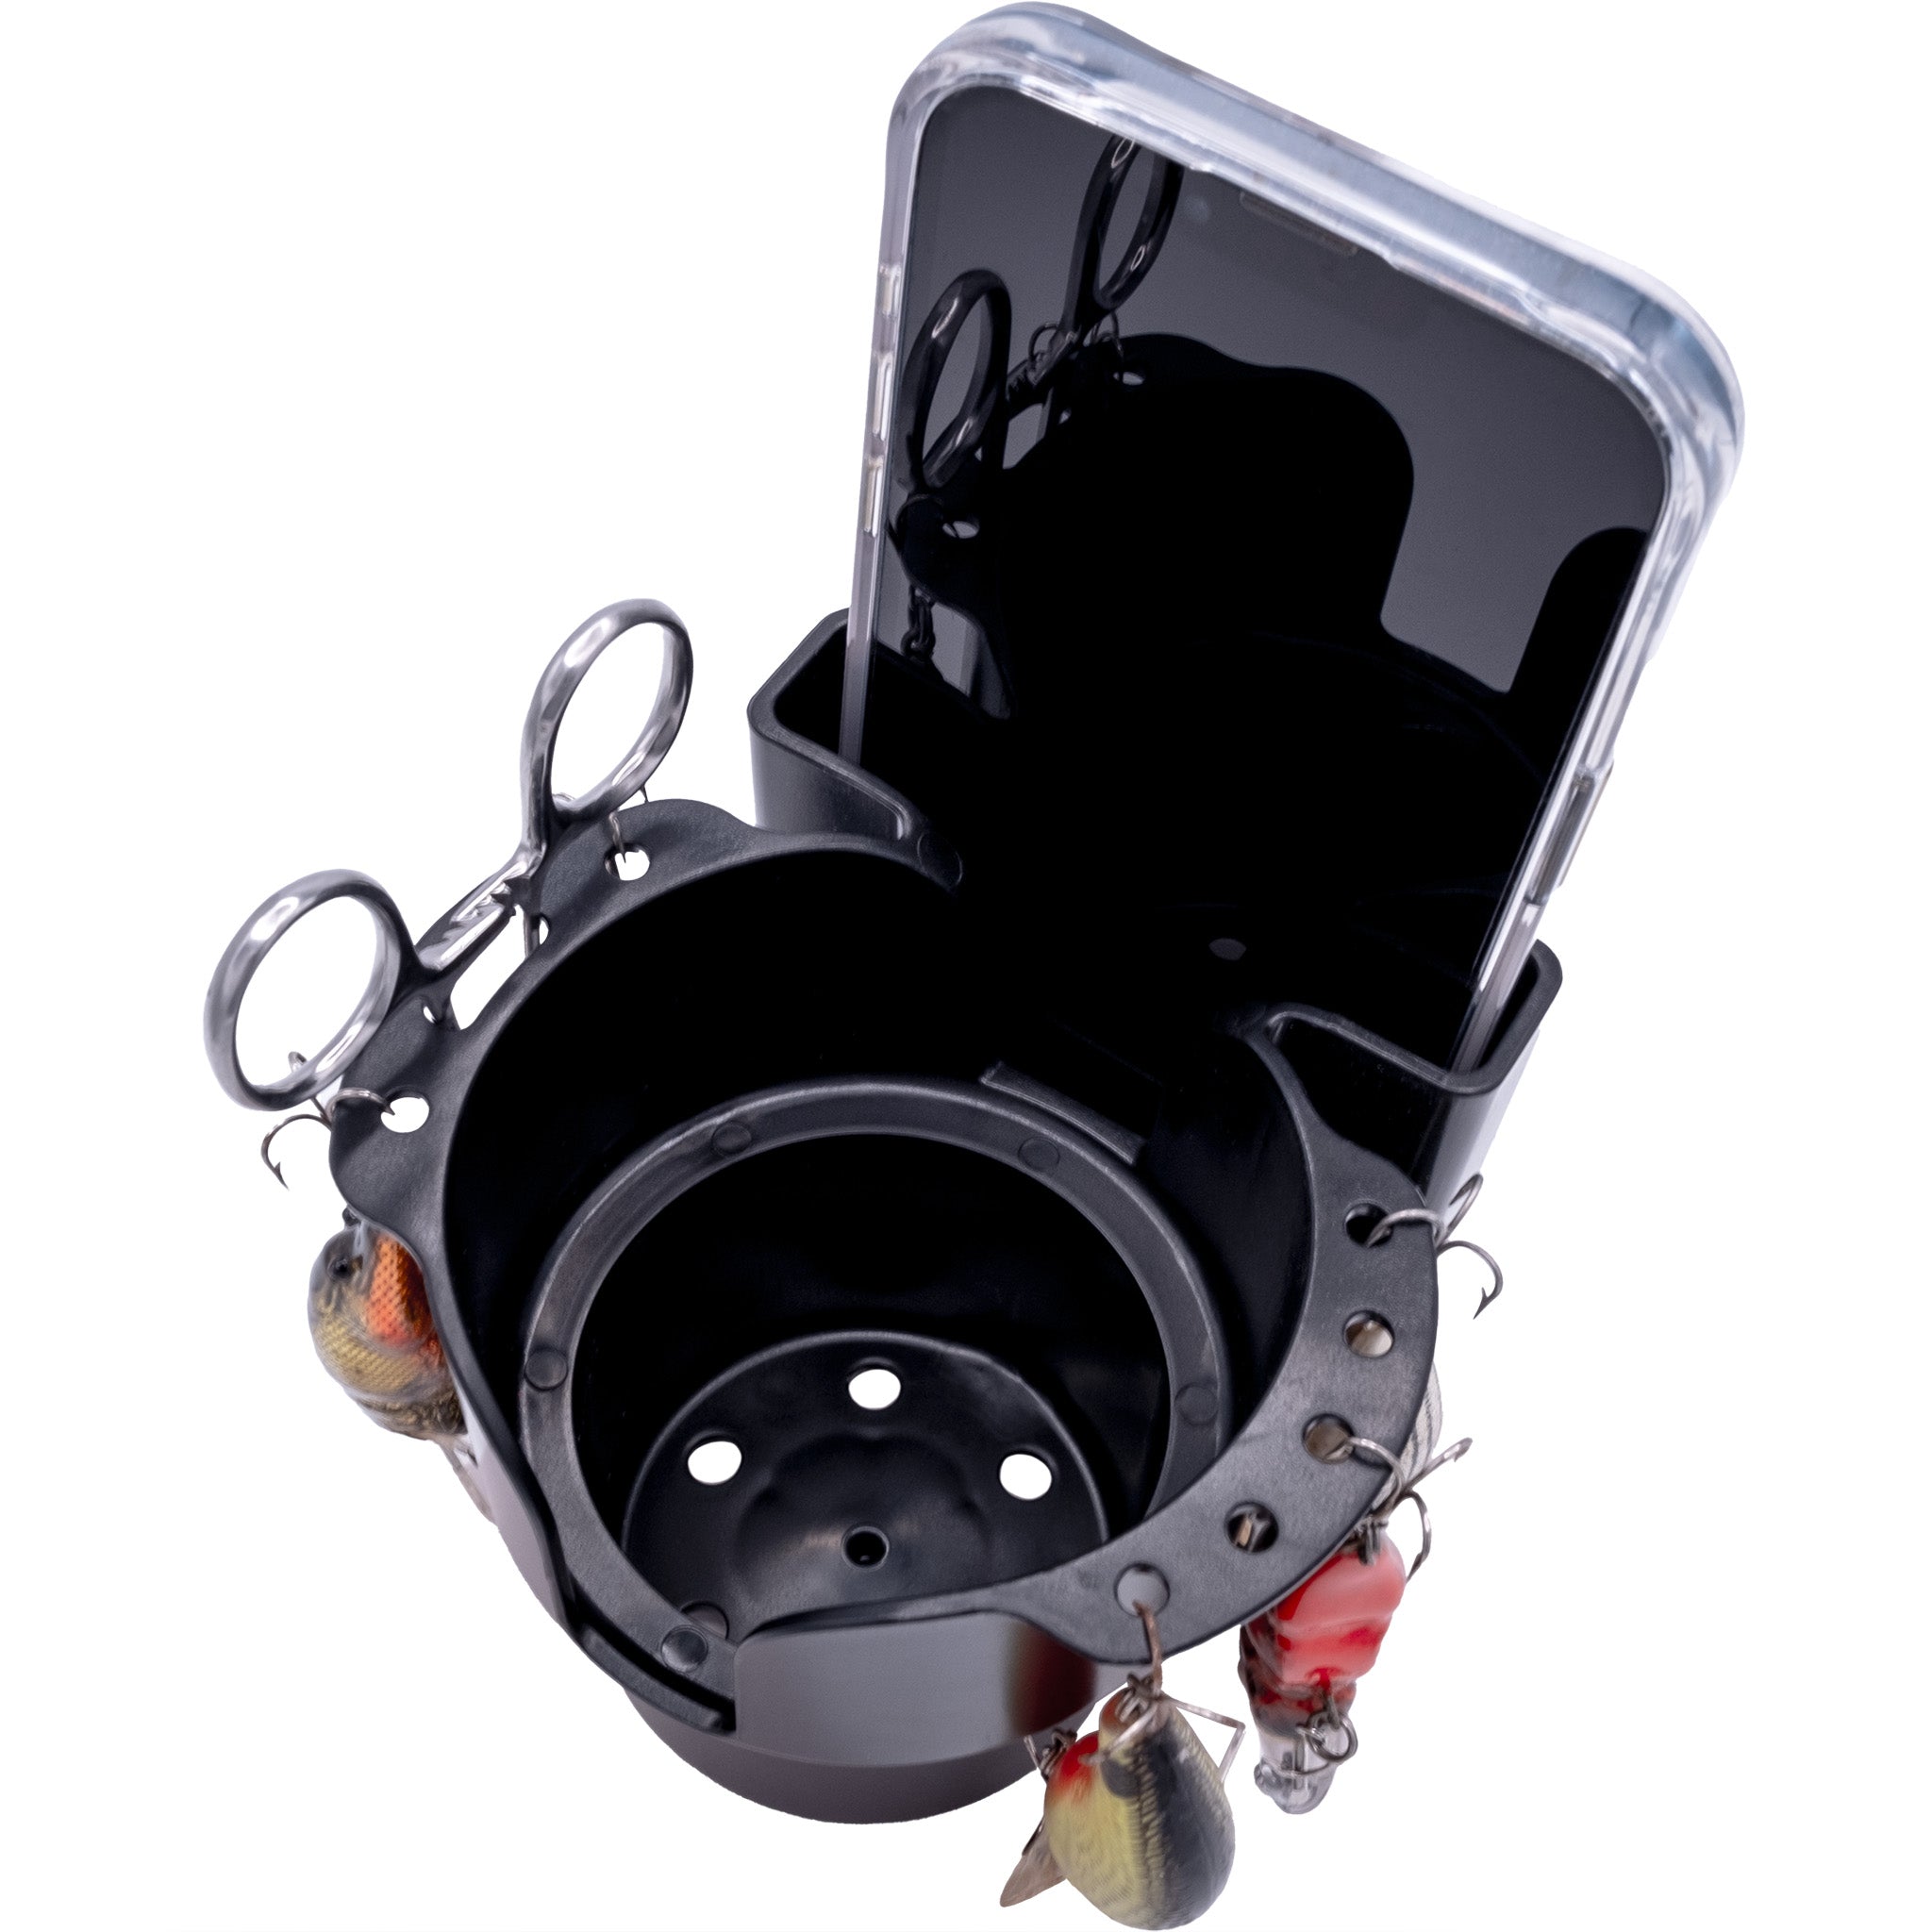 MultiCup Phone & Cup Holder